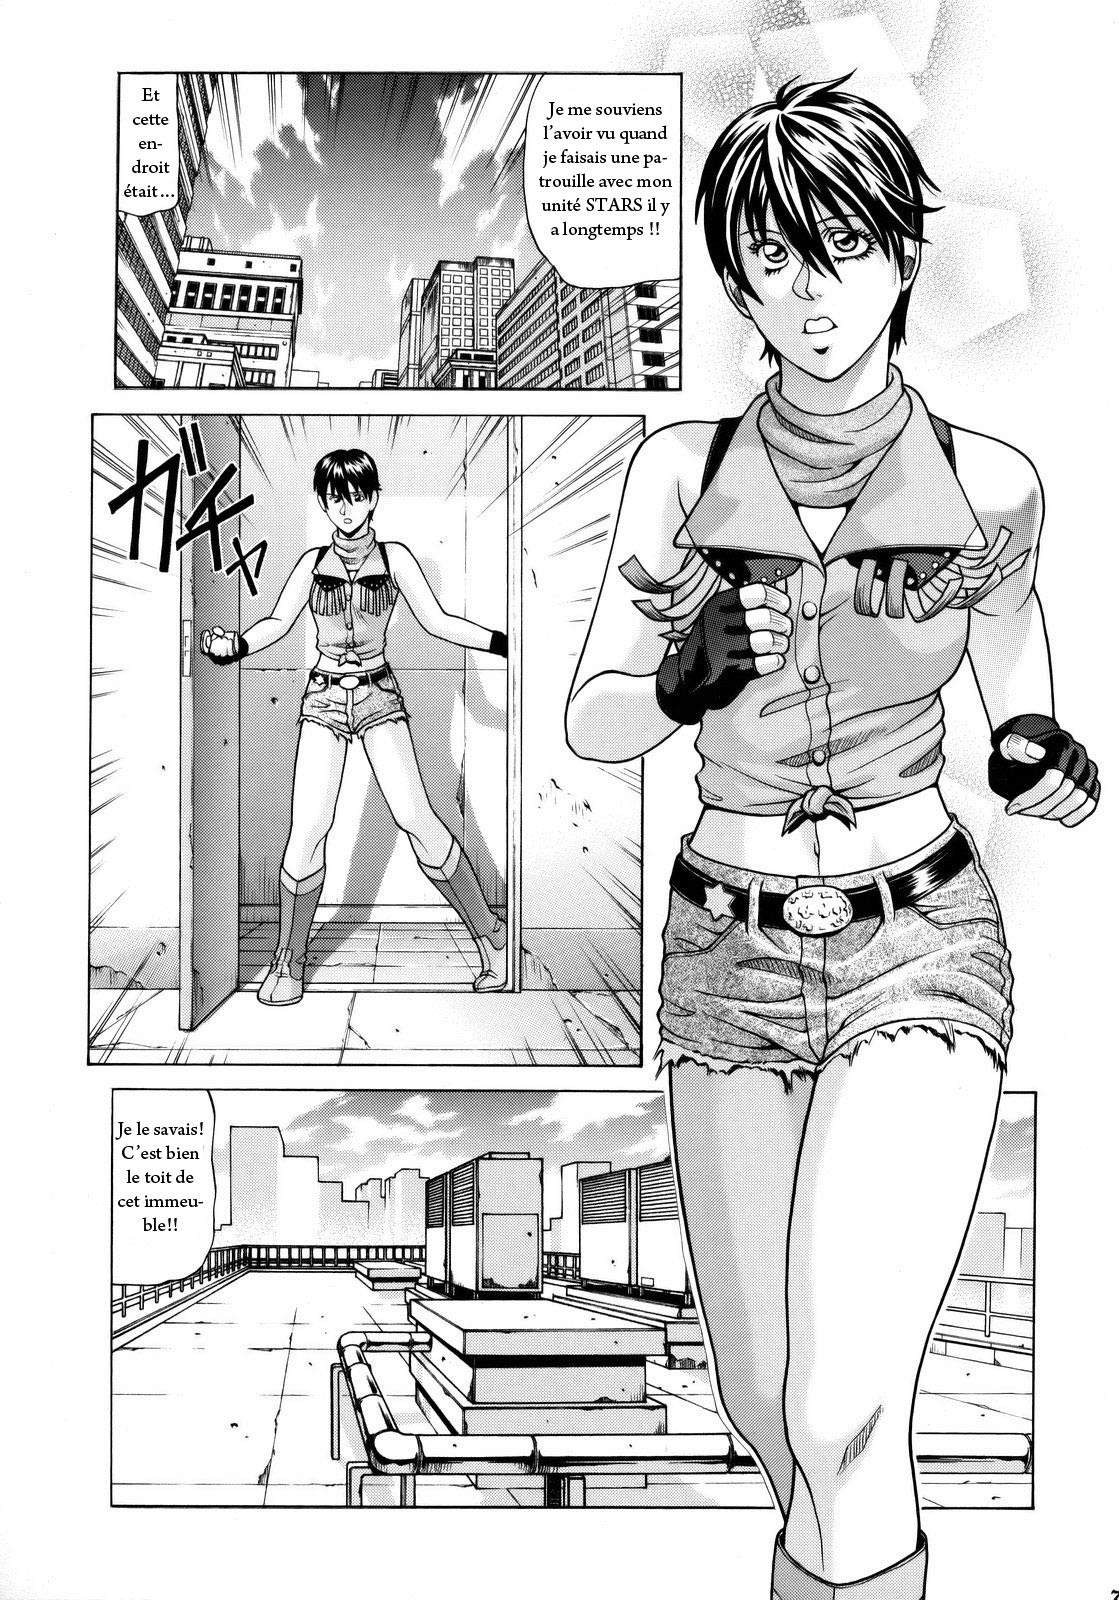 (C75) [Human High-Light Film (Jacky Knee-san)] Rebecca Chambers (Resident Evil) [French] page 6 full